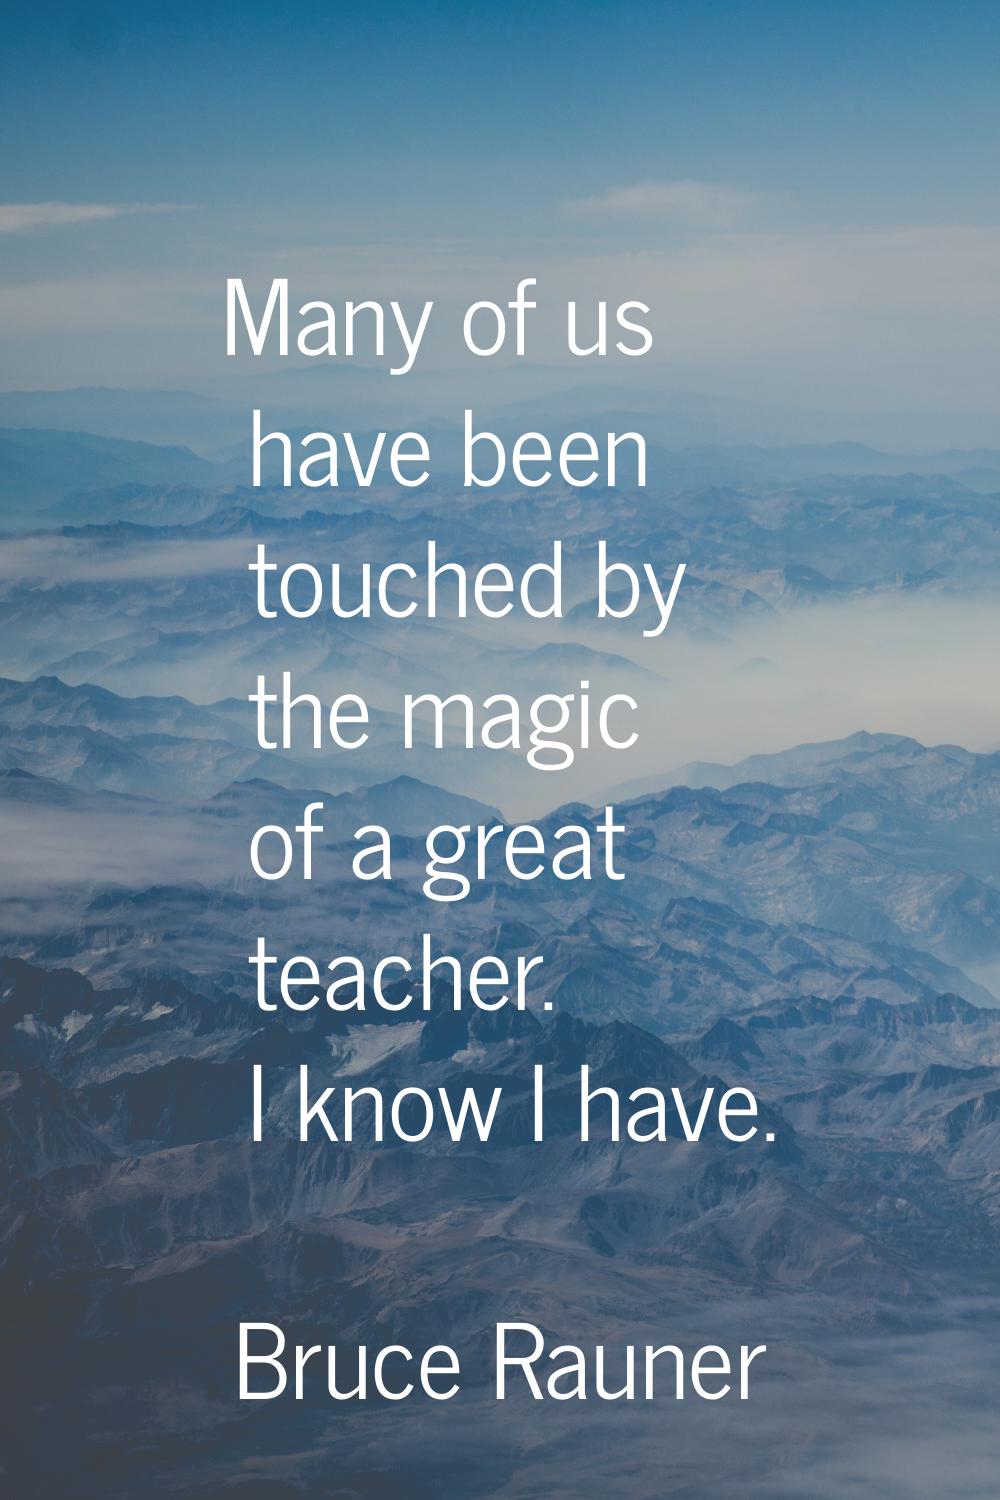 Many of us have been touched by the magic of a great teacher. I know I have.